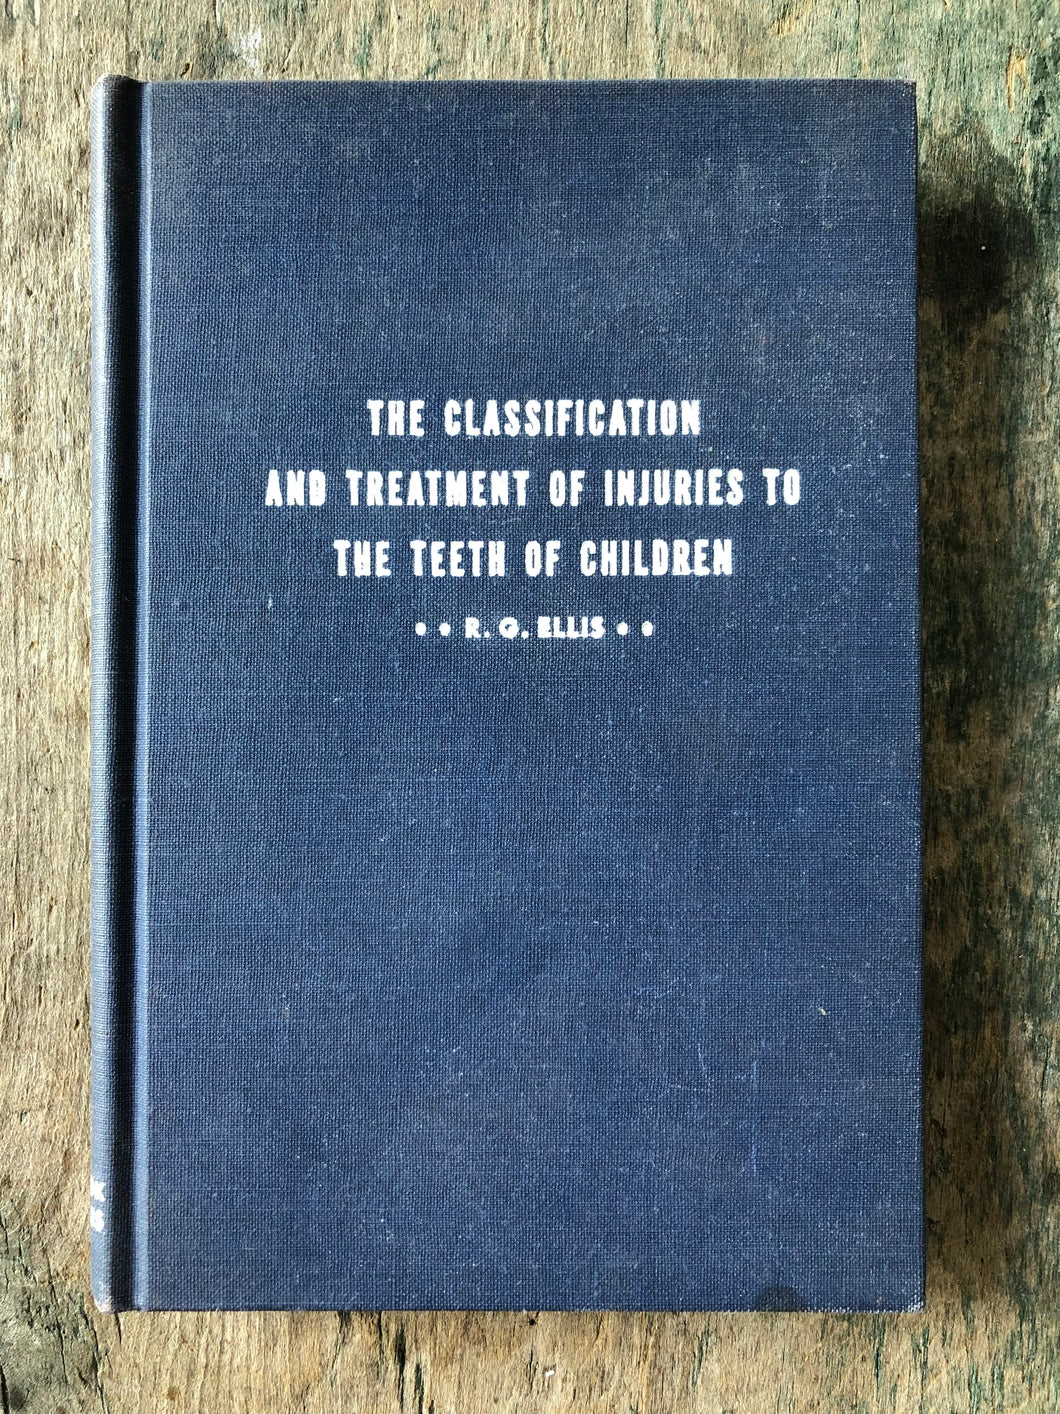 The Classification and Treatment of Injuries to the Teeth of Children. A Reference Manual for the Dental Student and the General Practitioner by Roy Gilmore Ellis